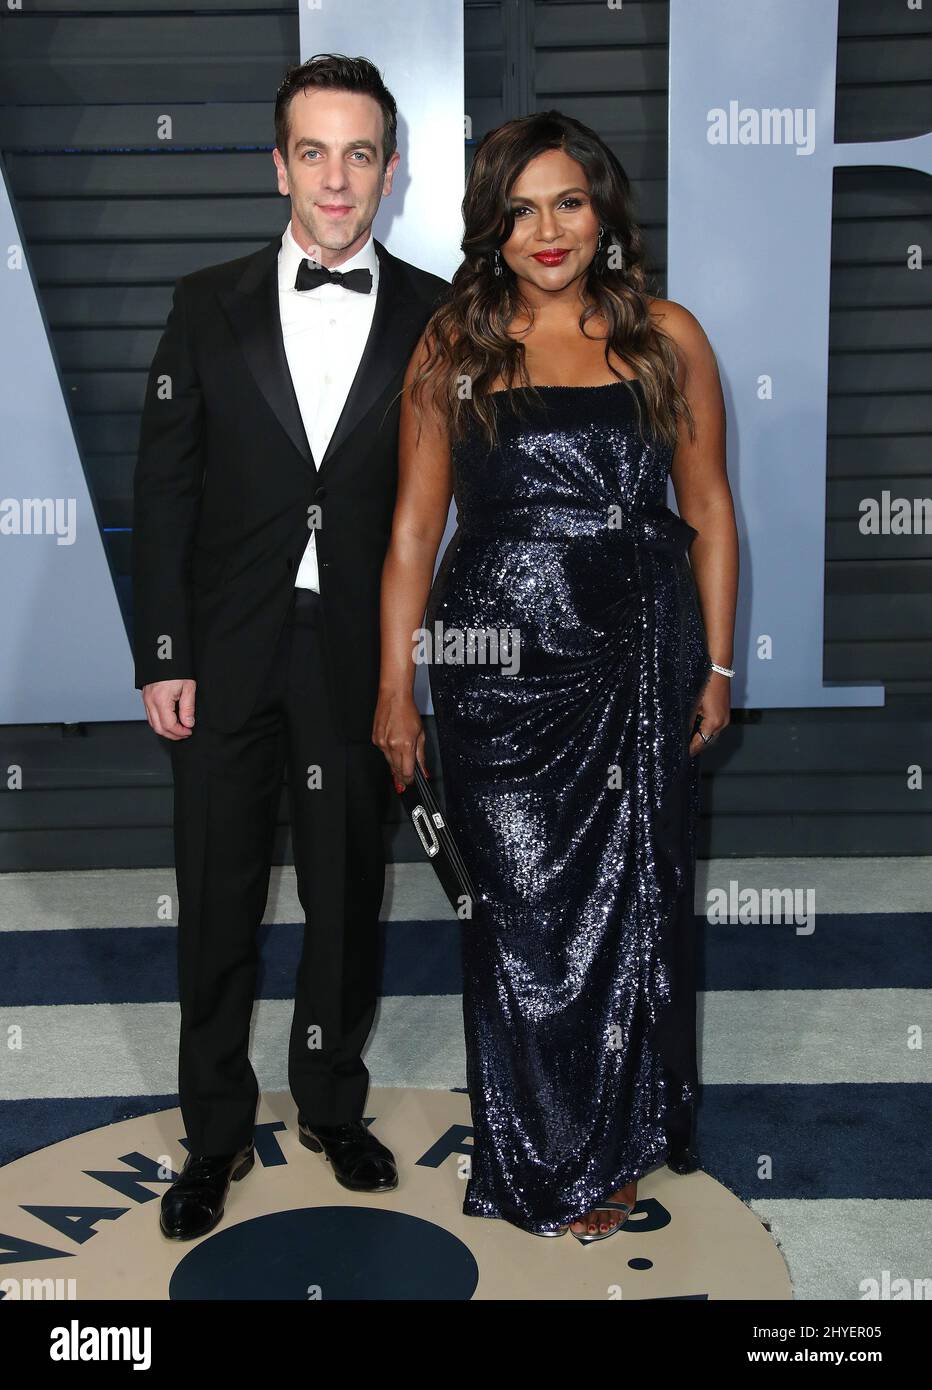 BJ Novak and Mindy Kaling at the 2018 Vanity Fair Oscar Party hosted by ...